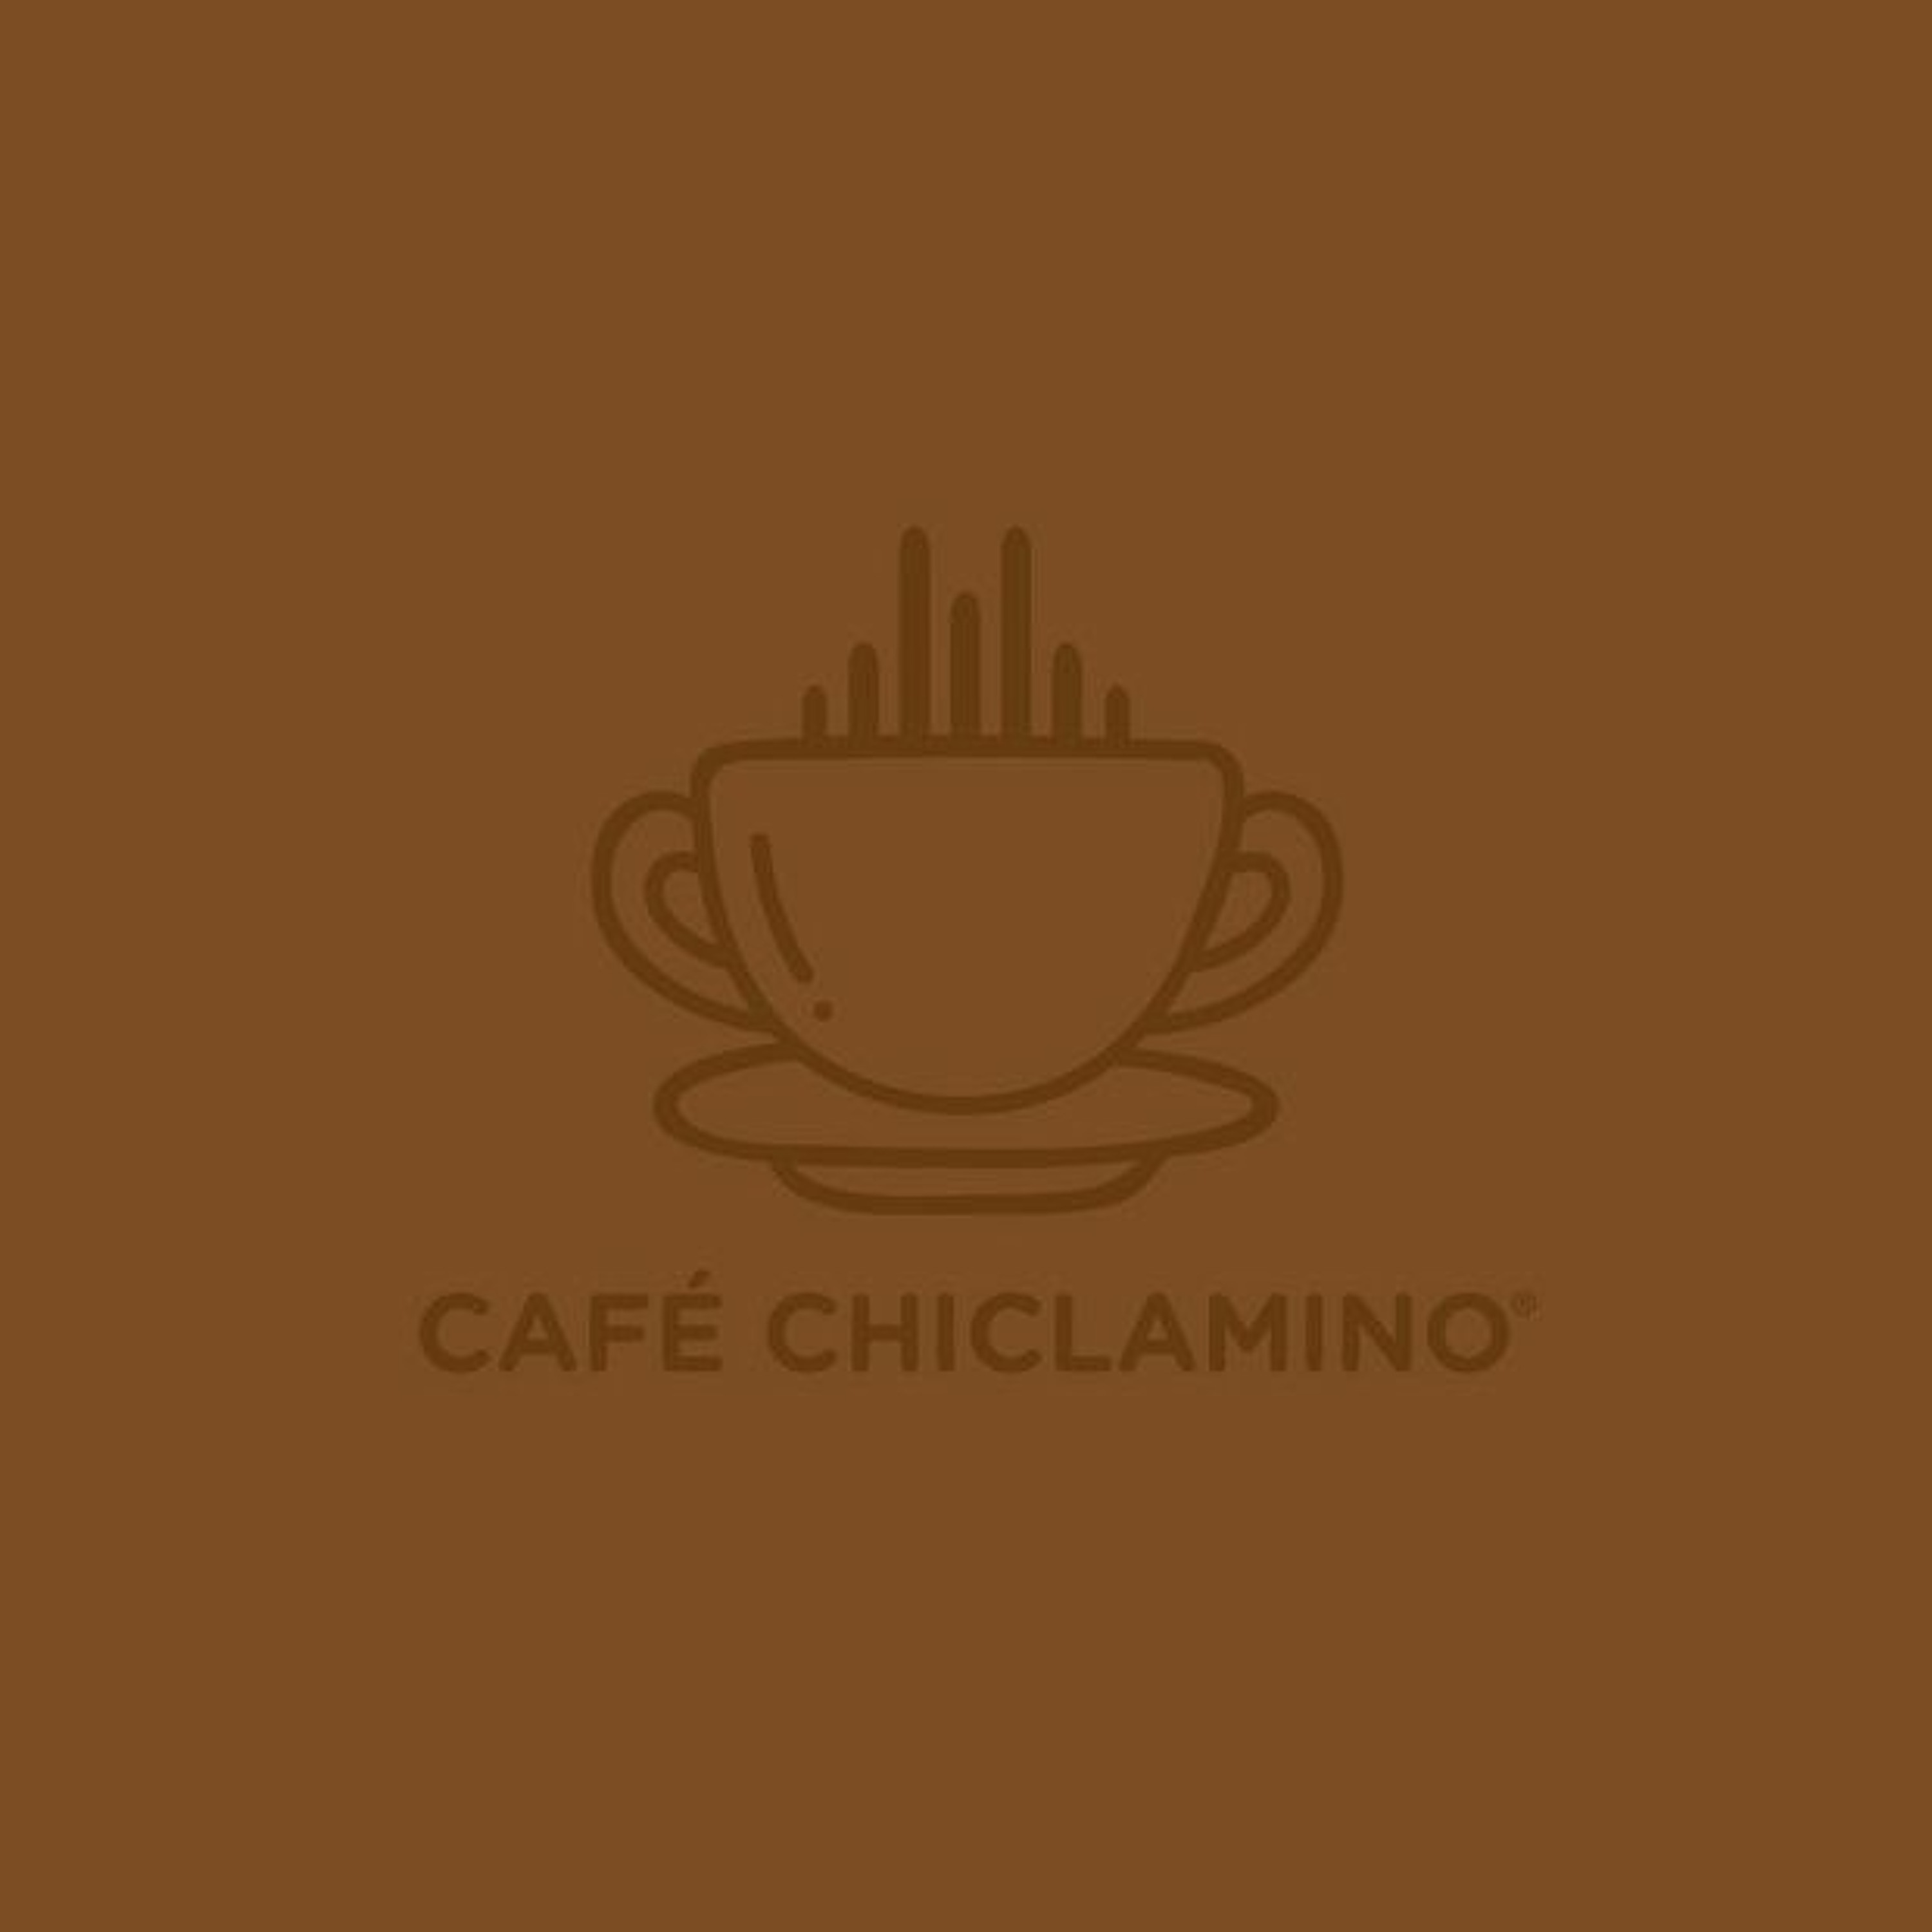 Café Chiclamino HAPPY TAQUER DAY